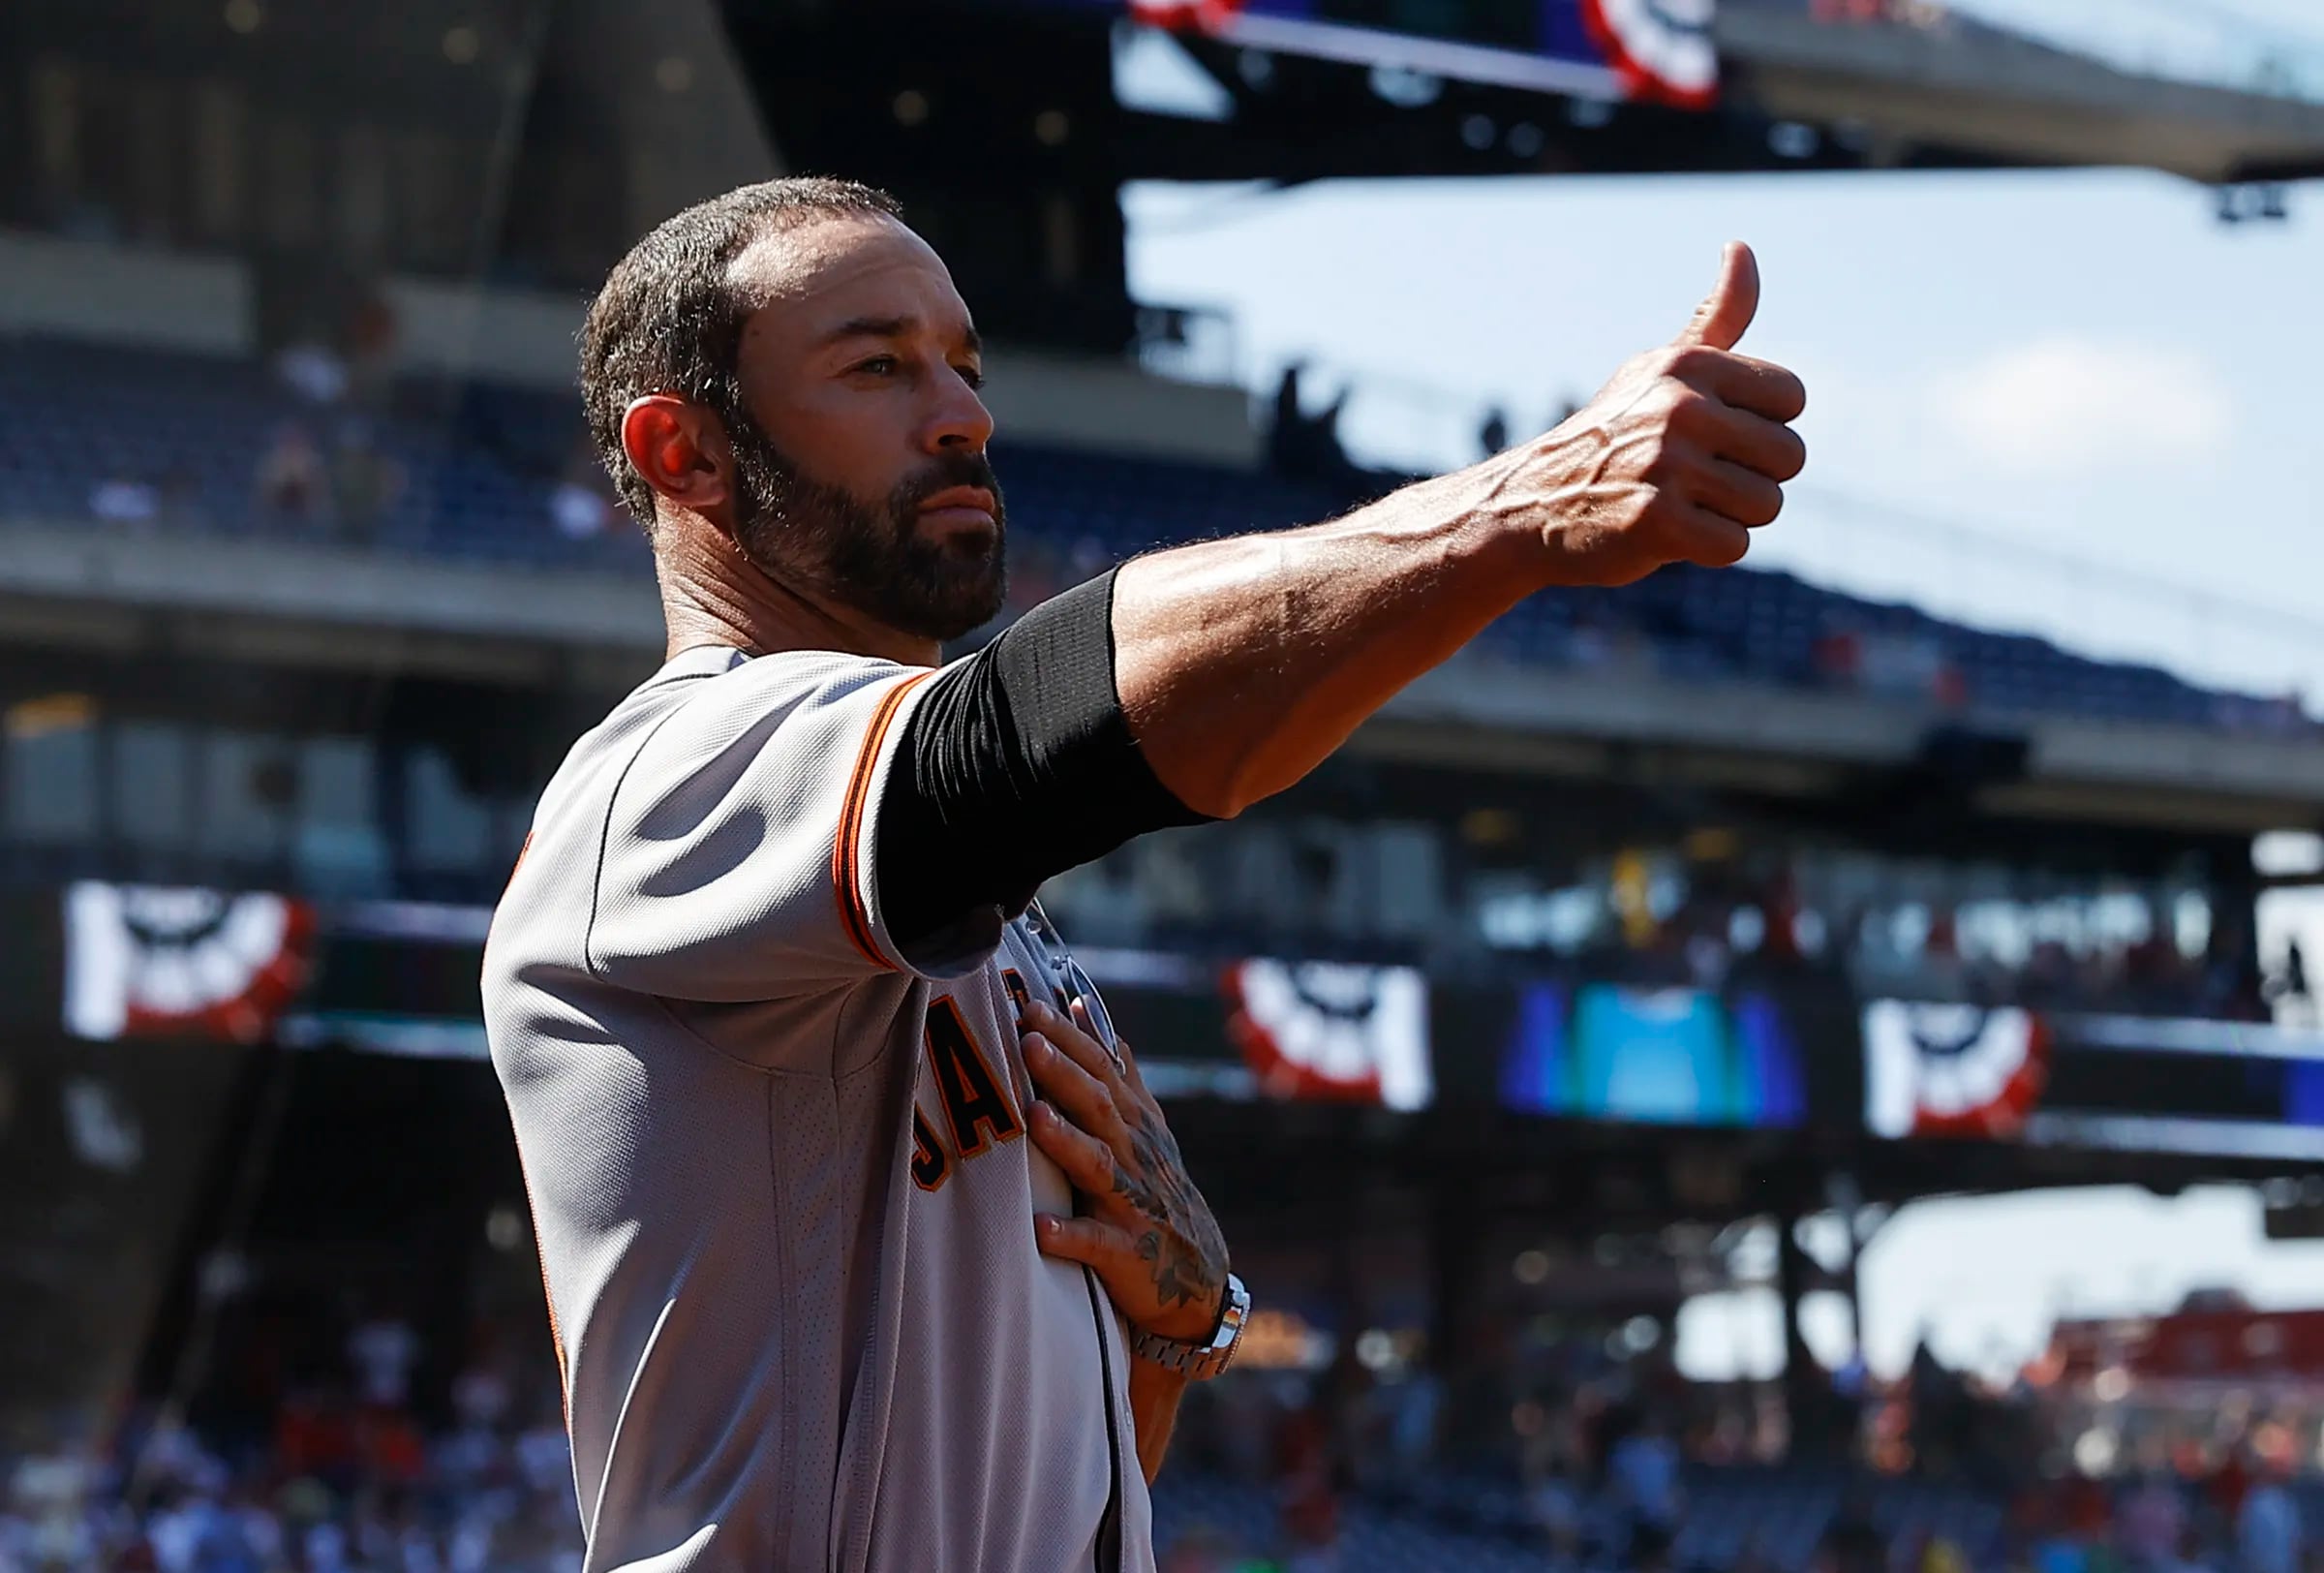 San Francisco Giants fire Jewish manager Gabe Kapler disappoint